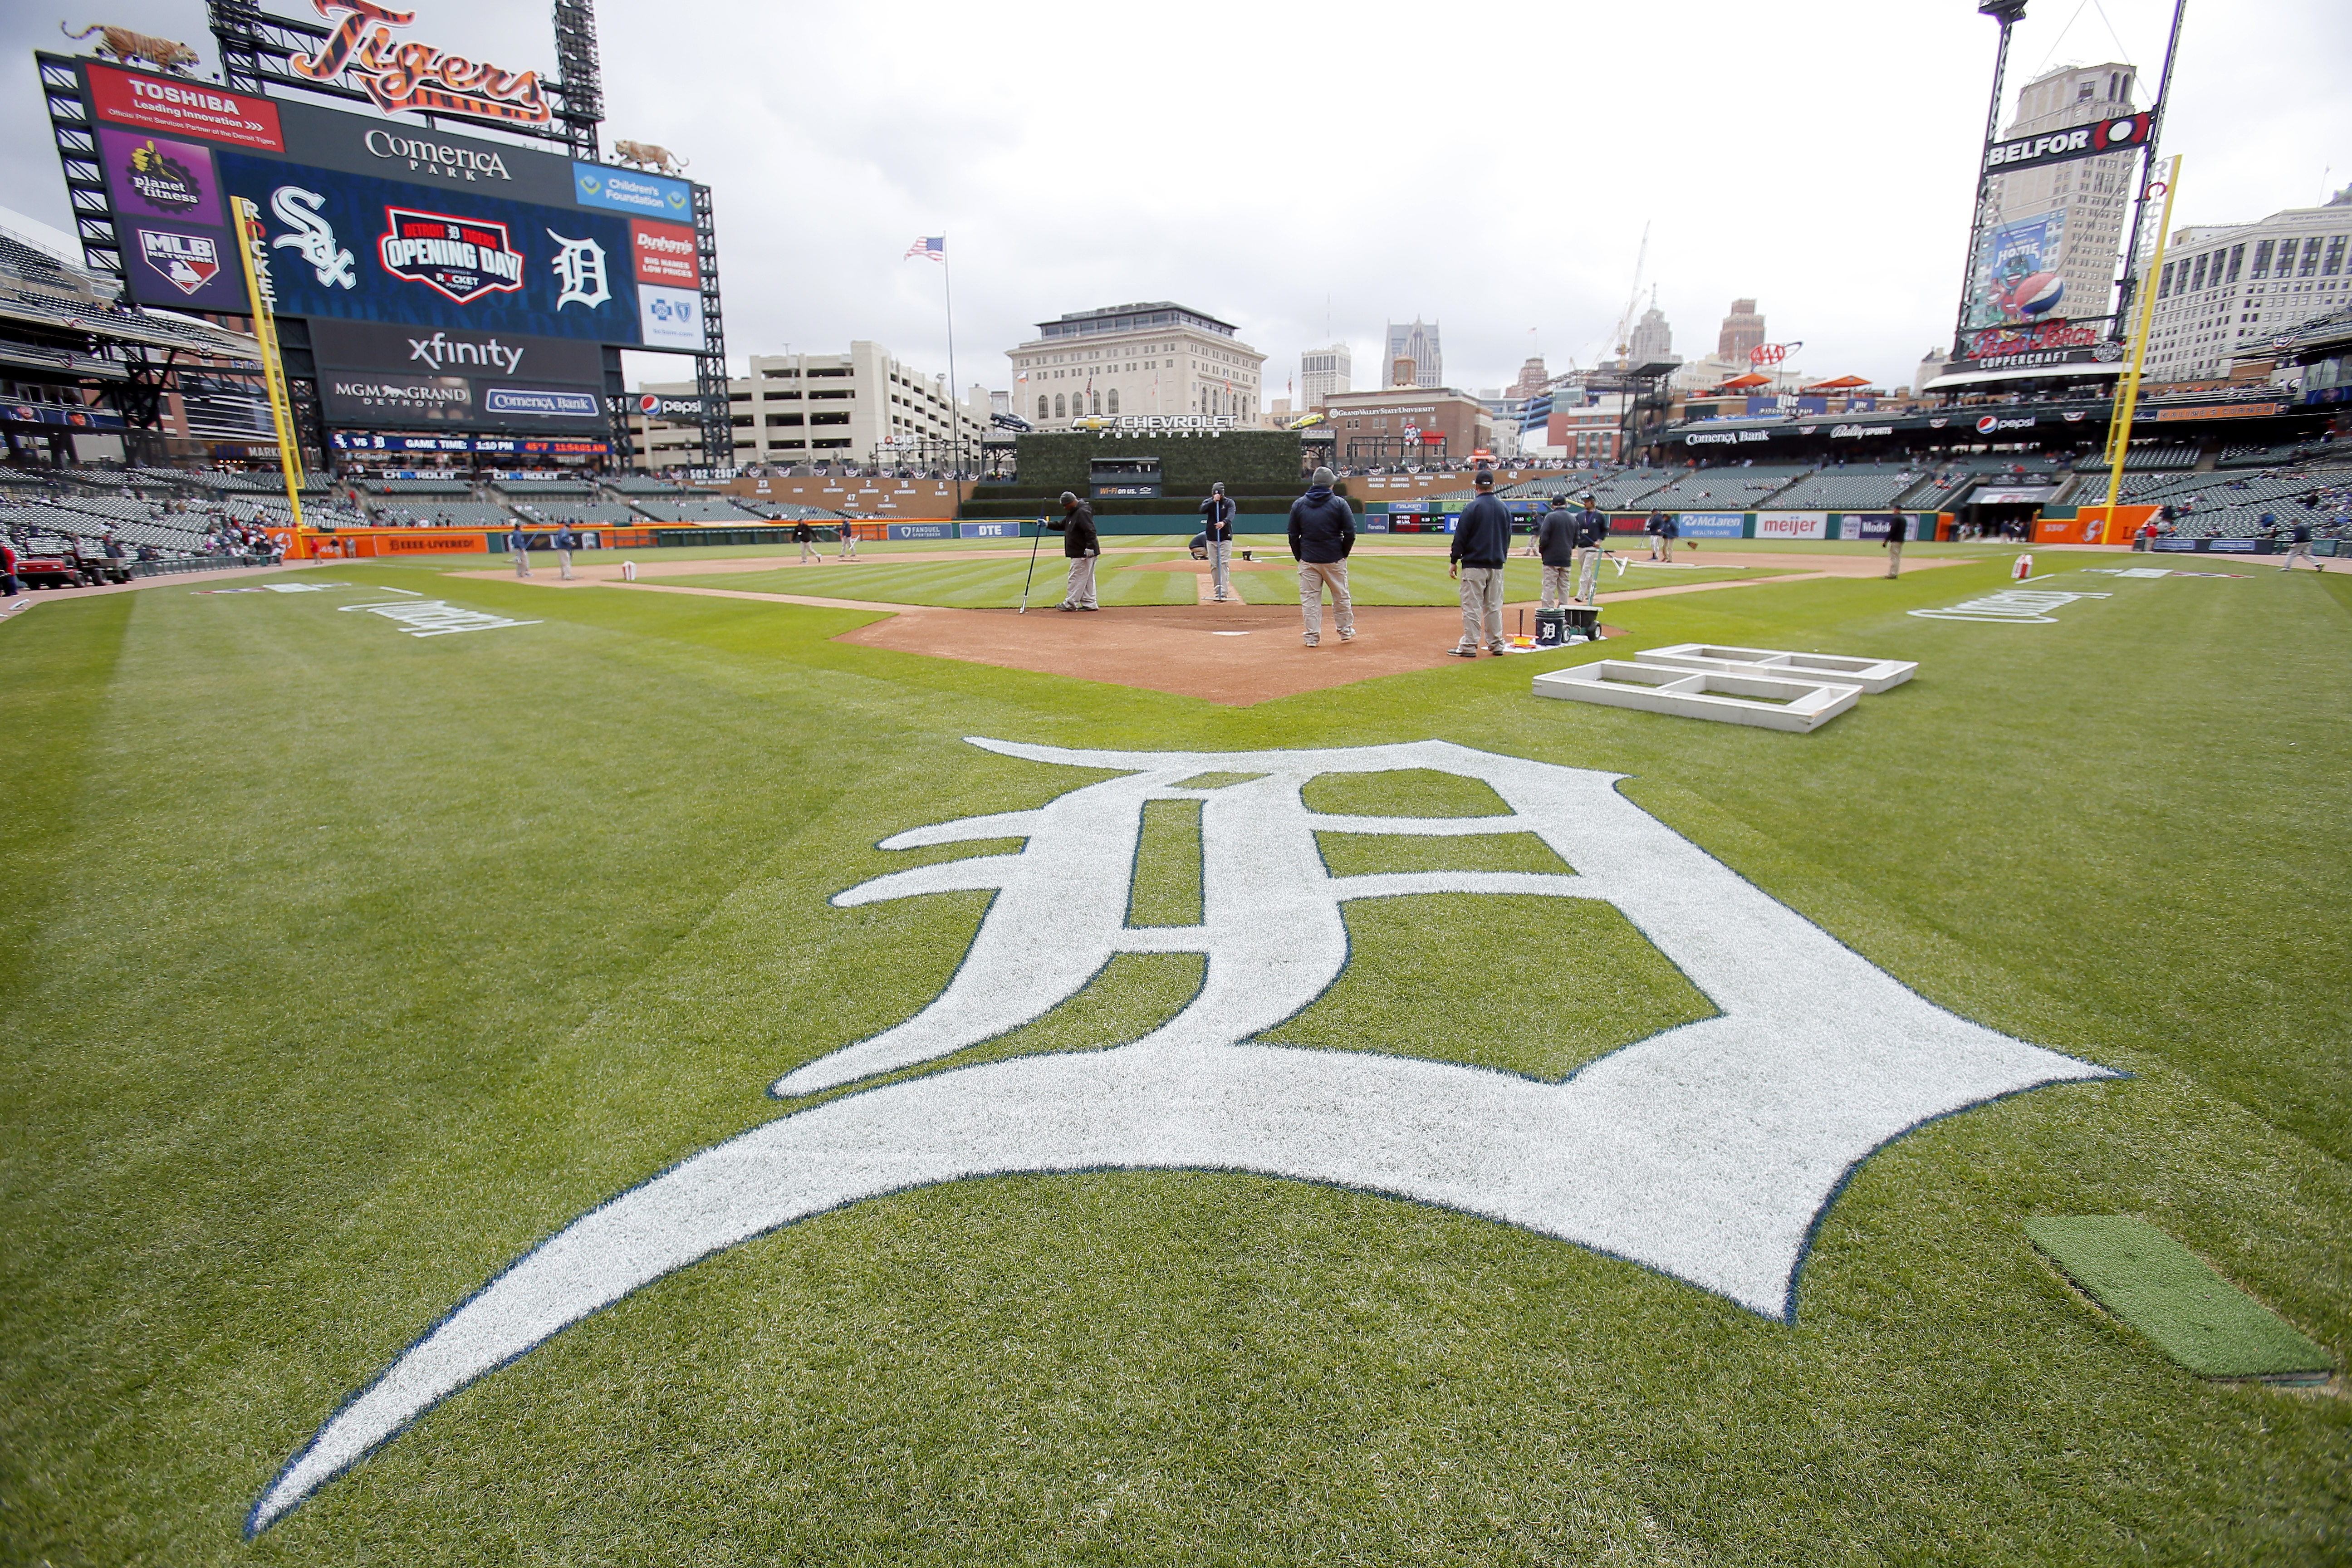 Here’s Detroit Tigers’ Starting Lineup On Opening Day Against White Sox